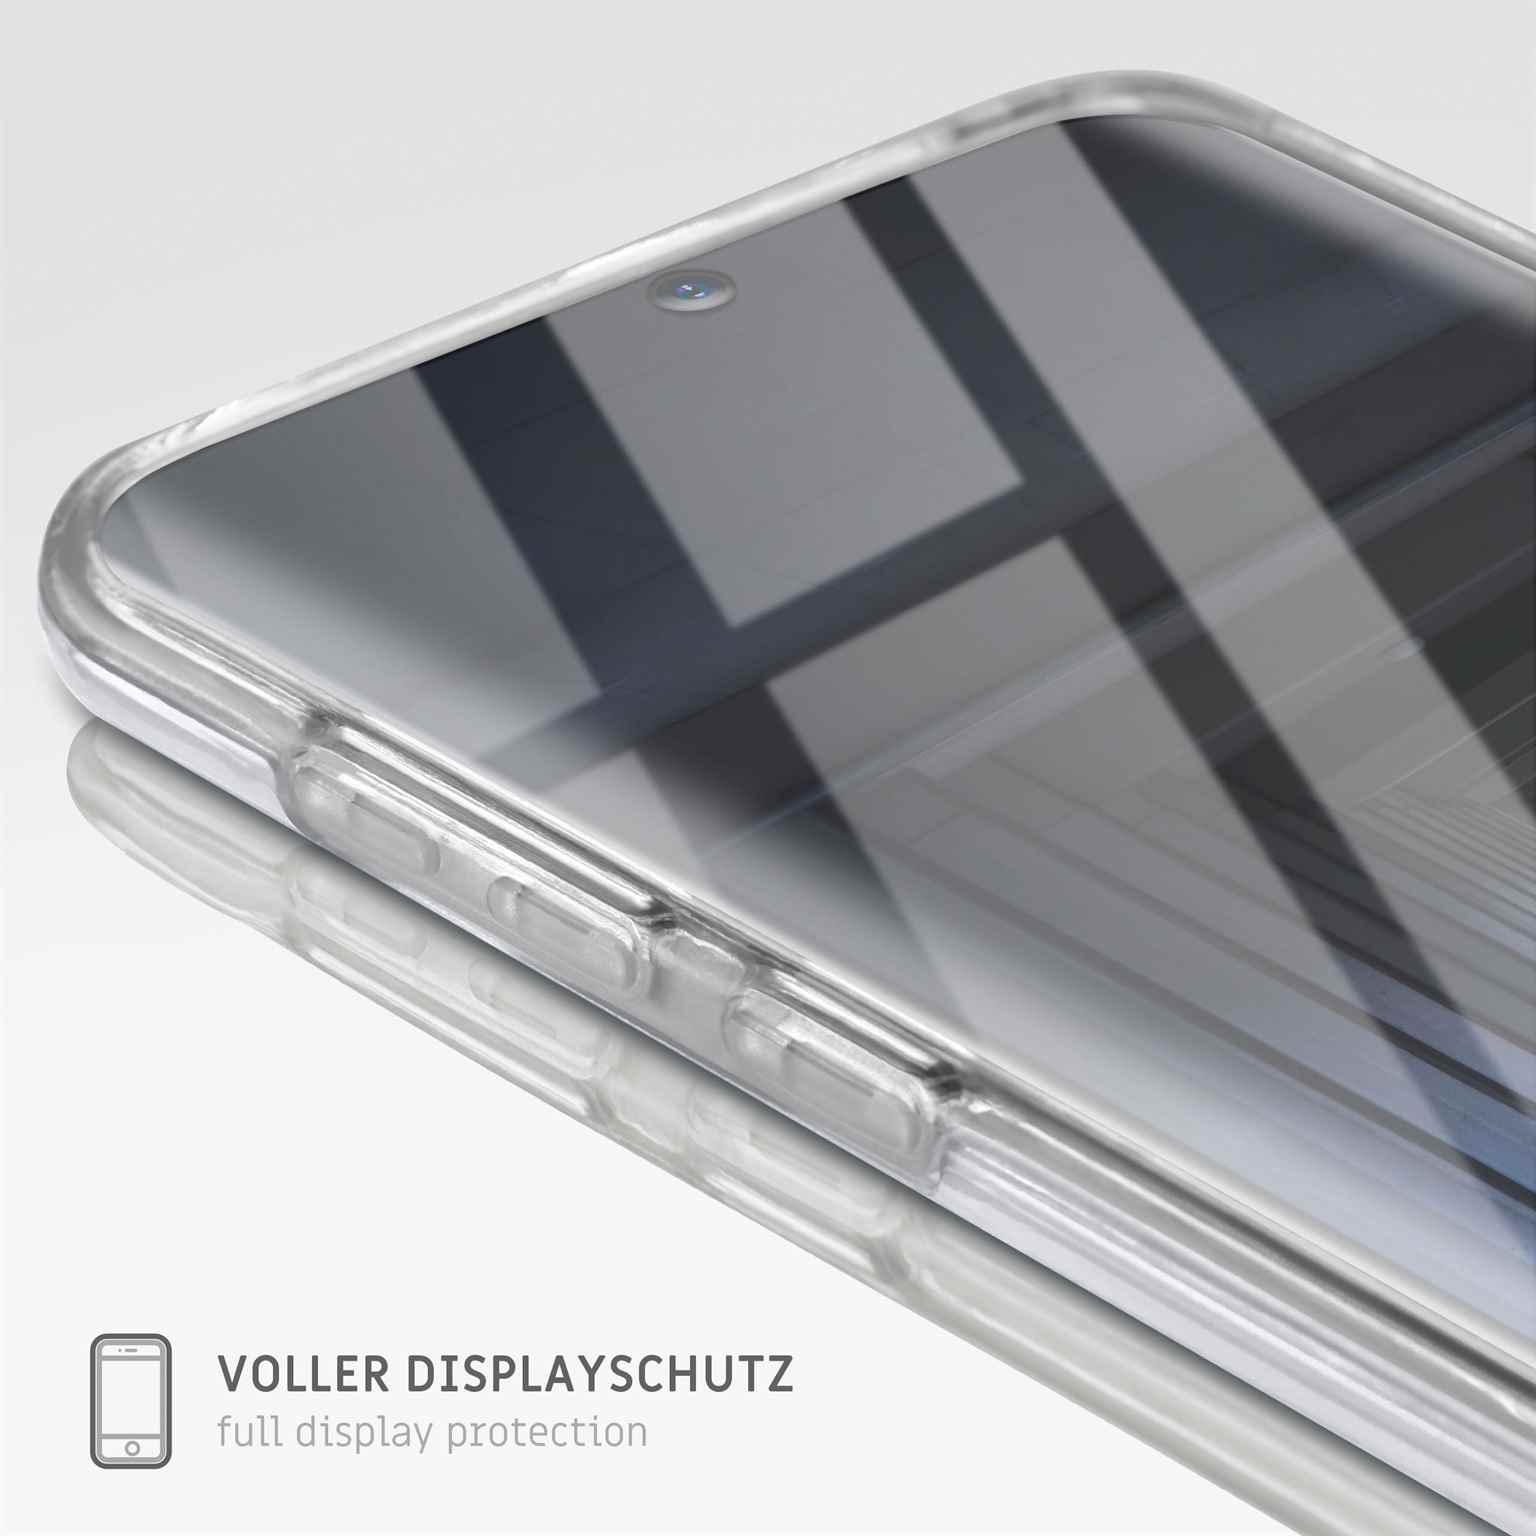 ONEFLOW Touch Case, Full Cover, S10 Galaxy Ultra-Clear Samsung, Plus